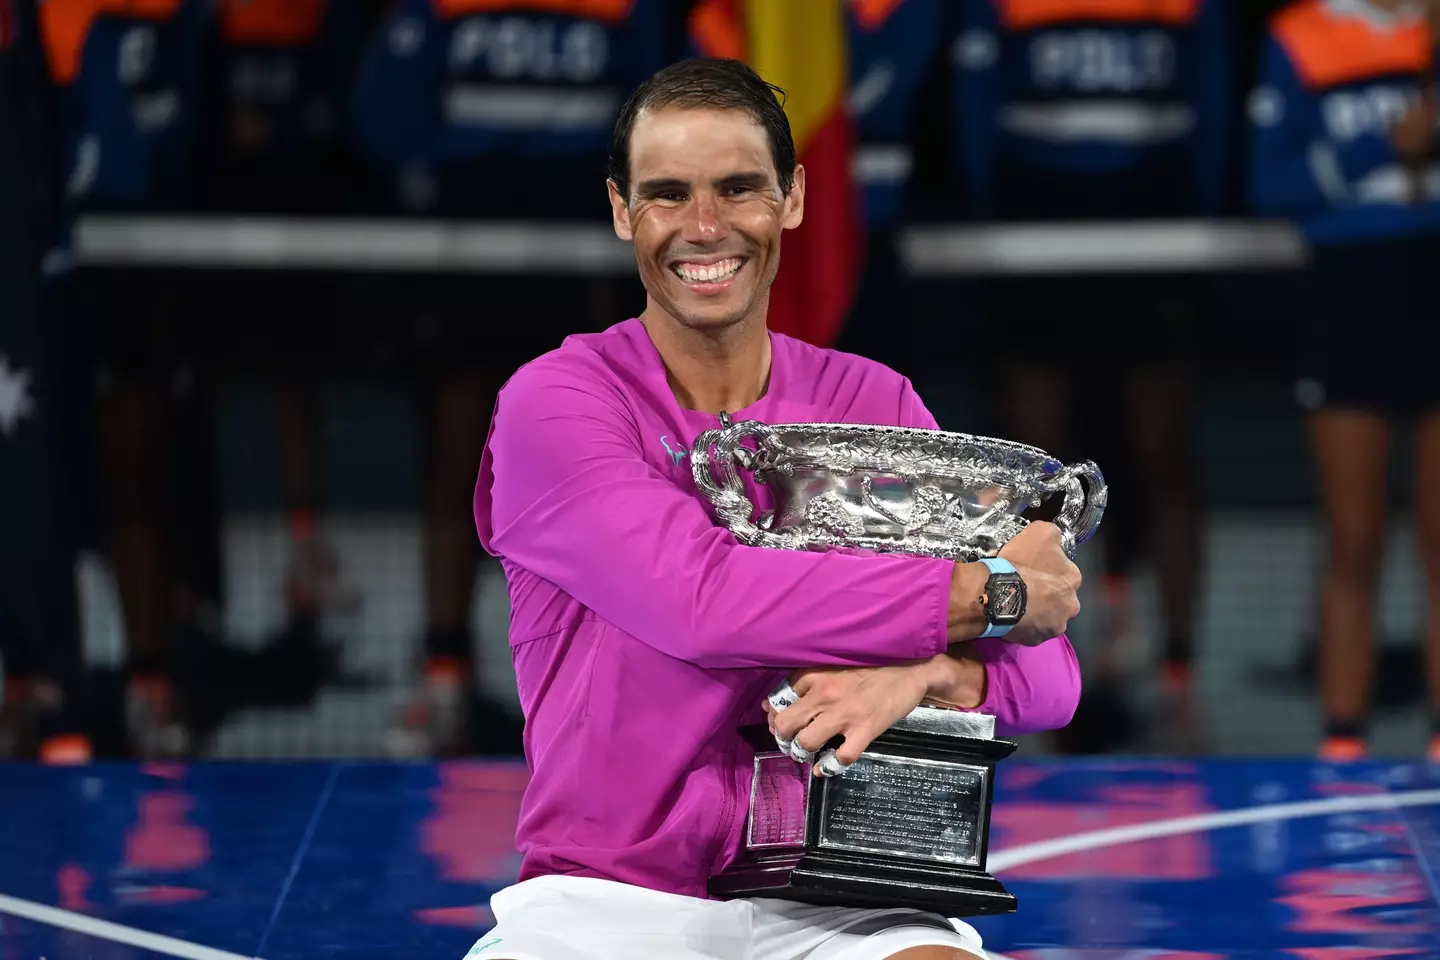 Nadal holds the trophy that took him above Djokovic and Roger Federer on 21 slam wins. Image: PA Images